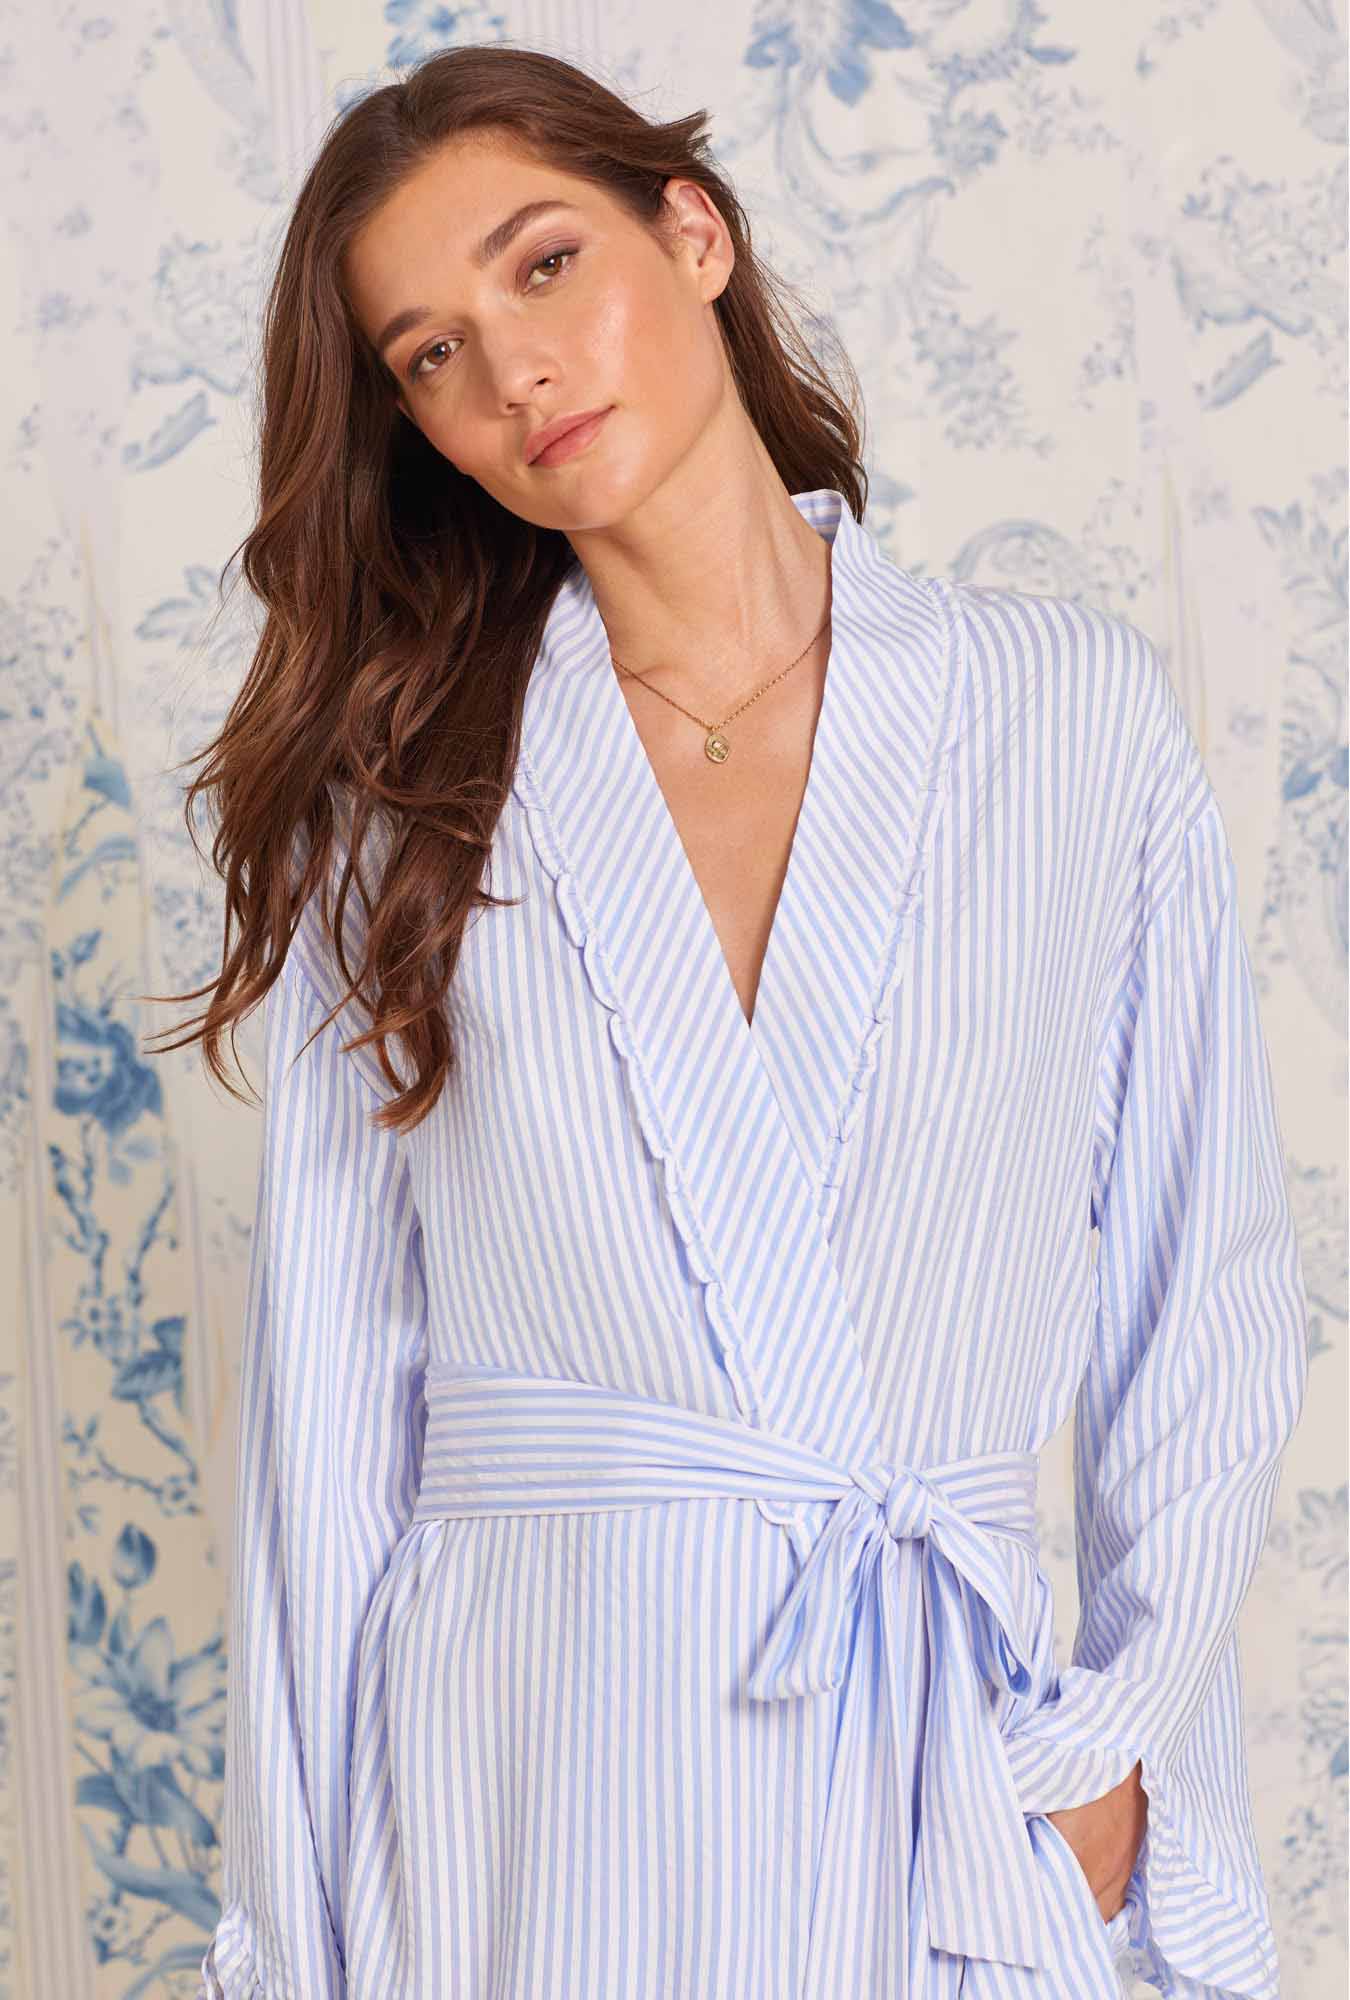 A lady wearing white robe with blue stripes